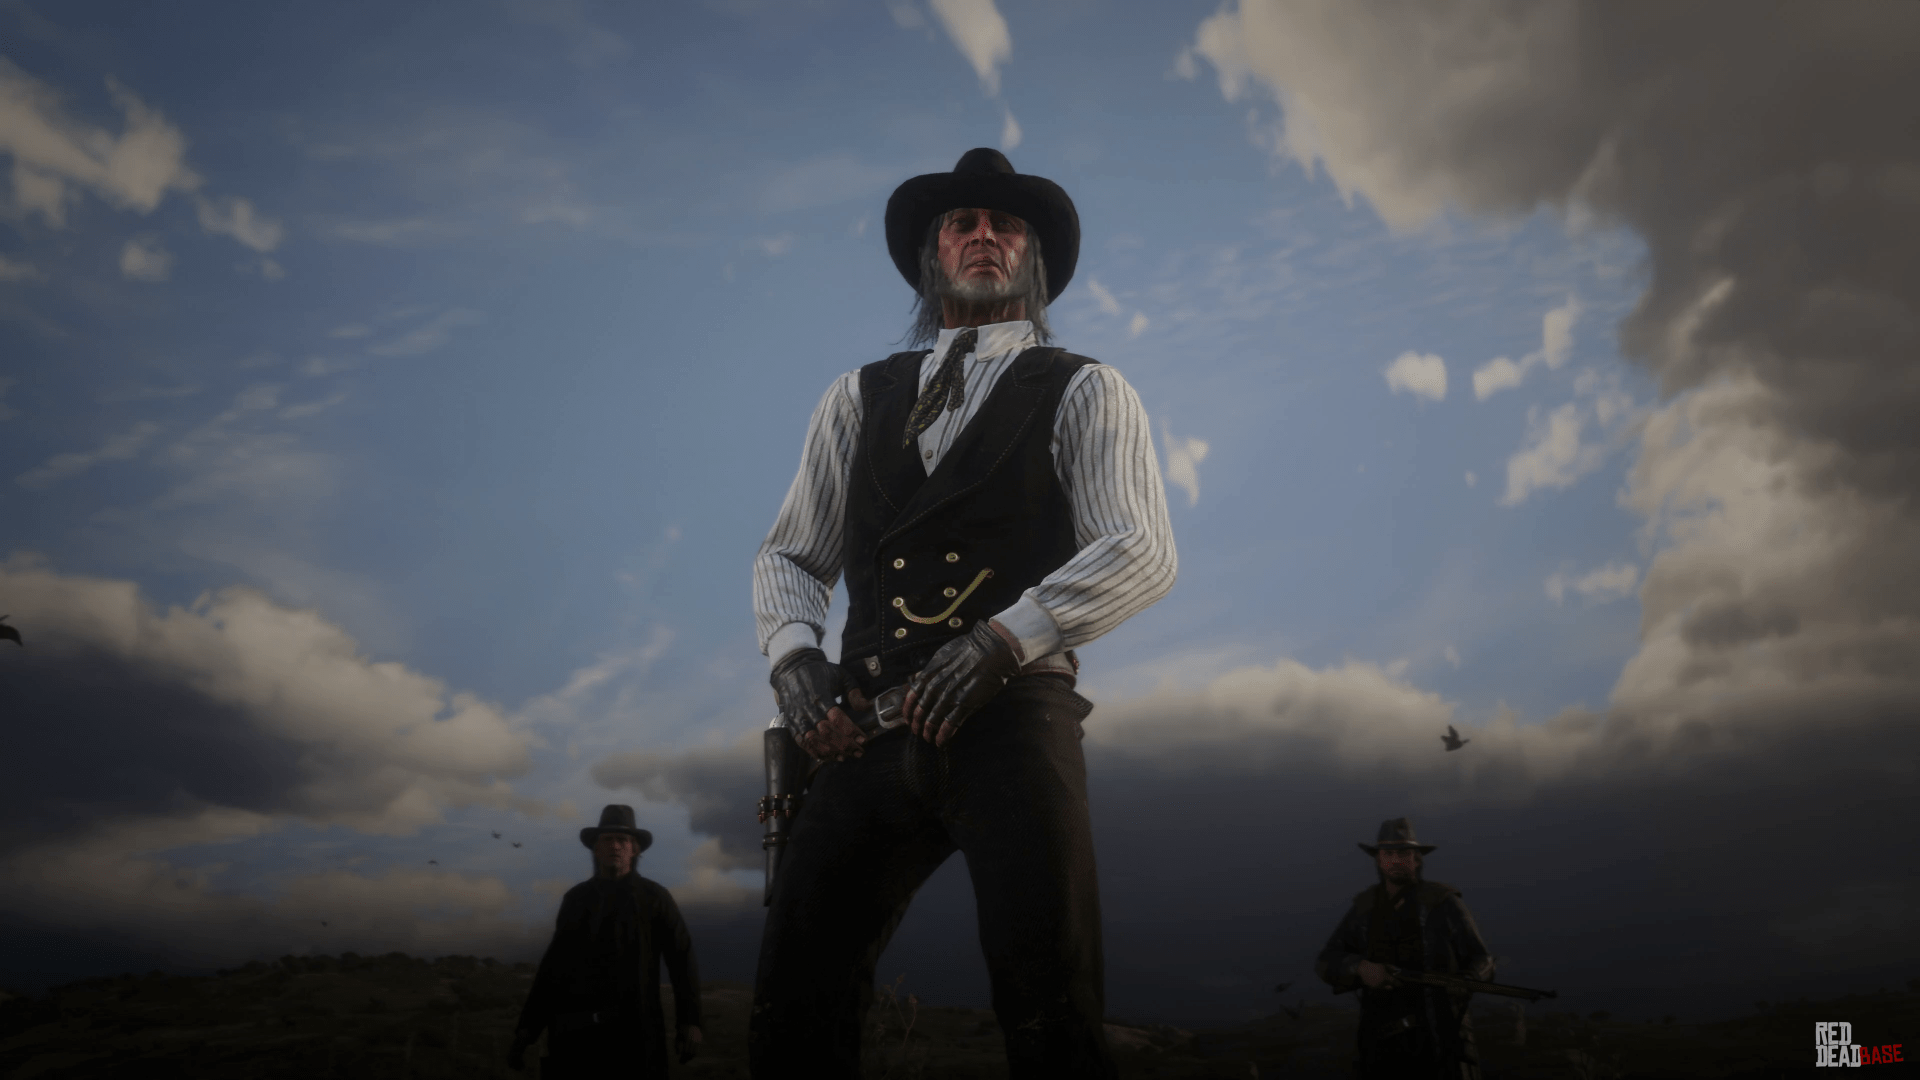 Colm Odriscoll Rdr2 Characters Guide Bio And Voice Actor 